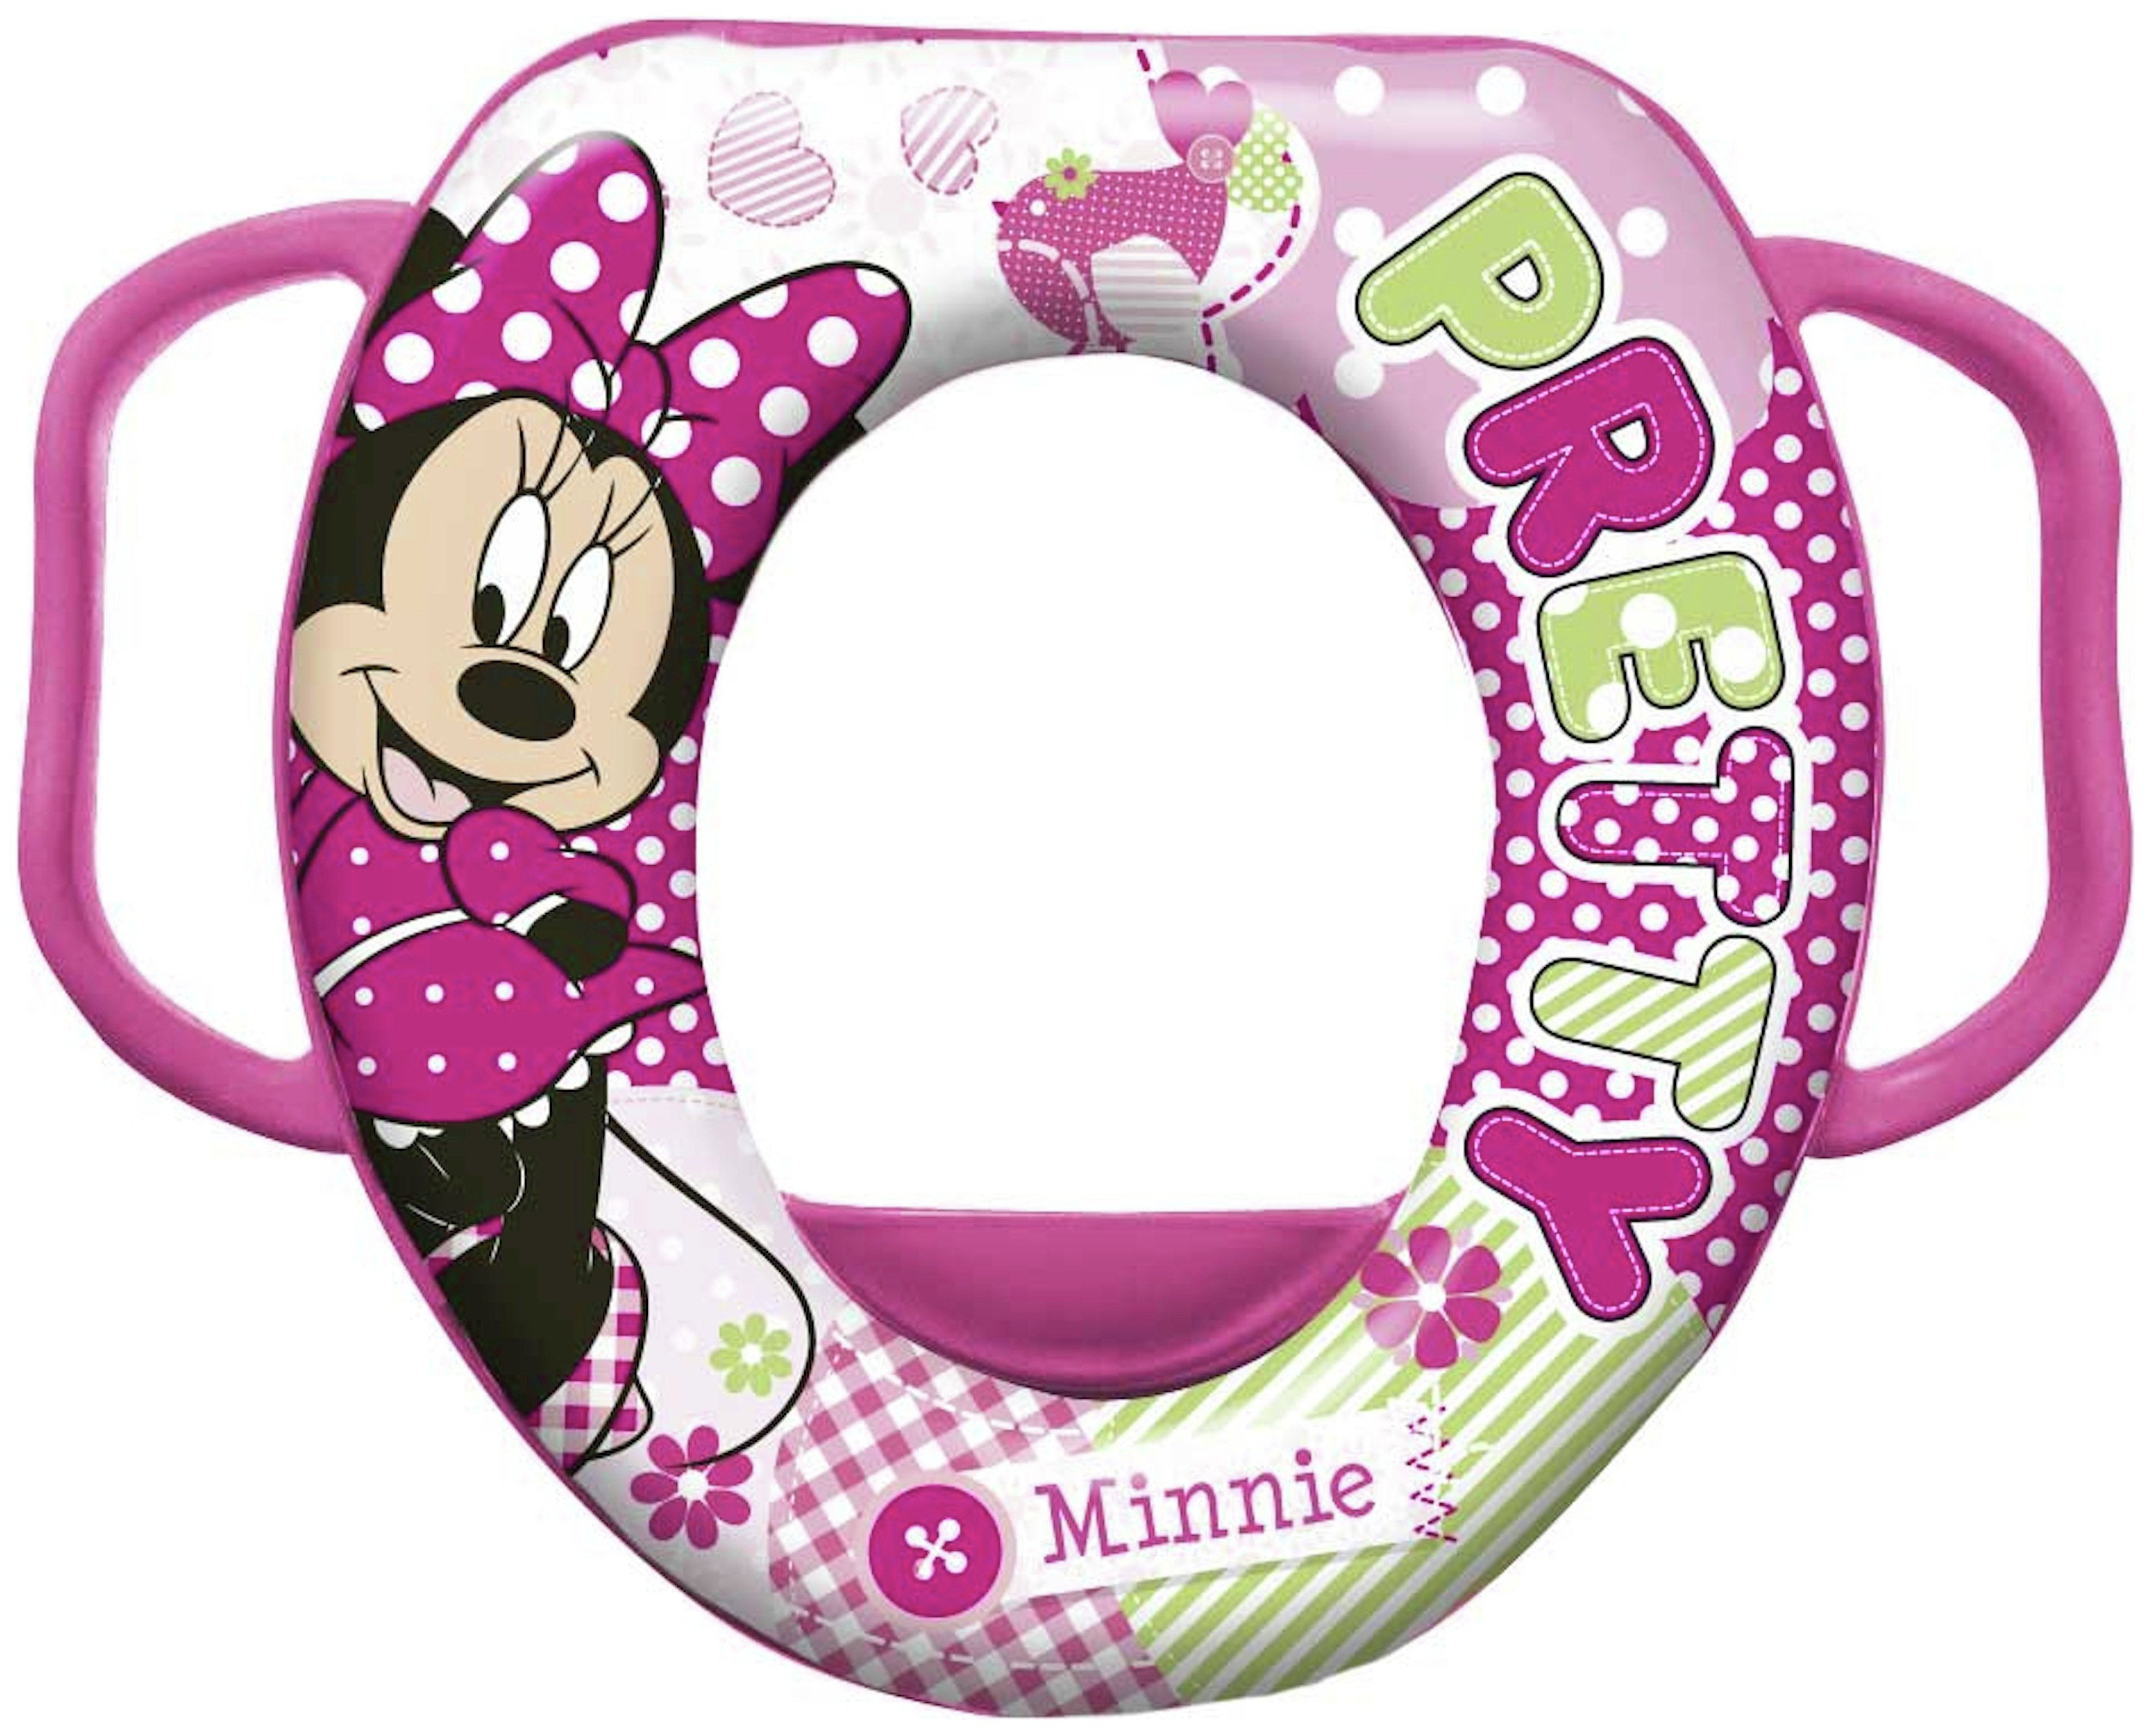 Minnie Mouse Soft Padded Toilet Seat